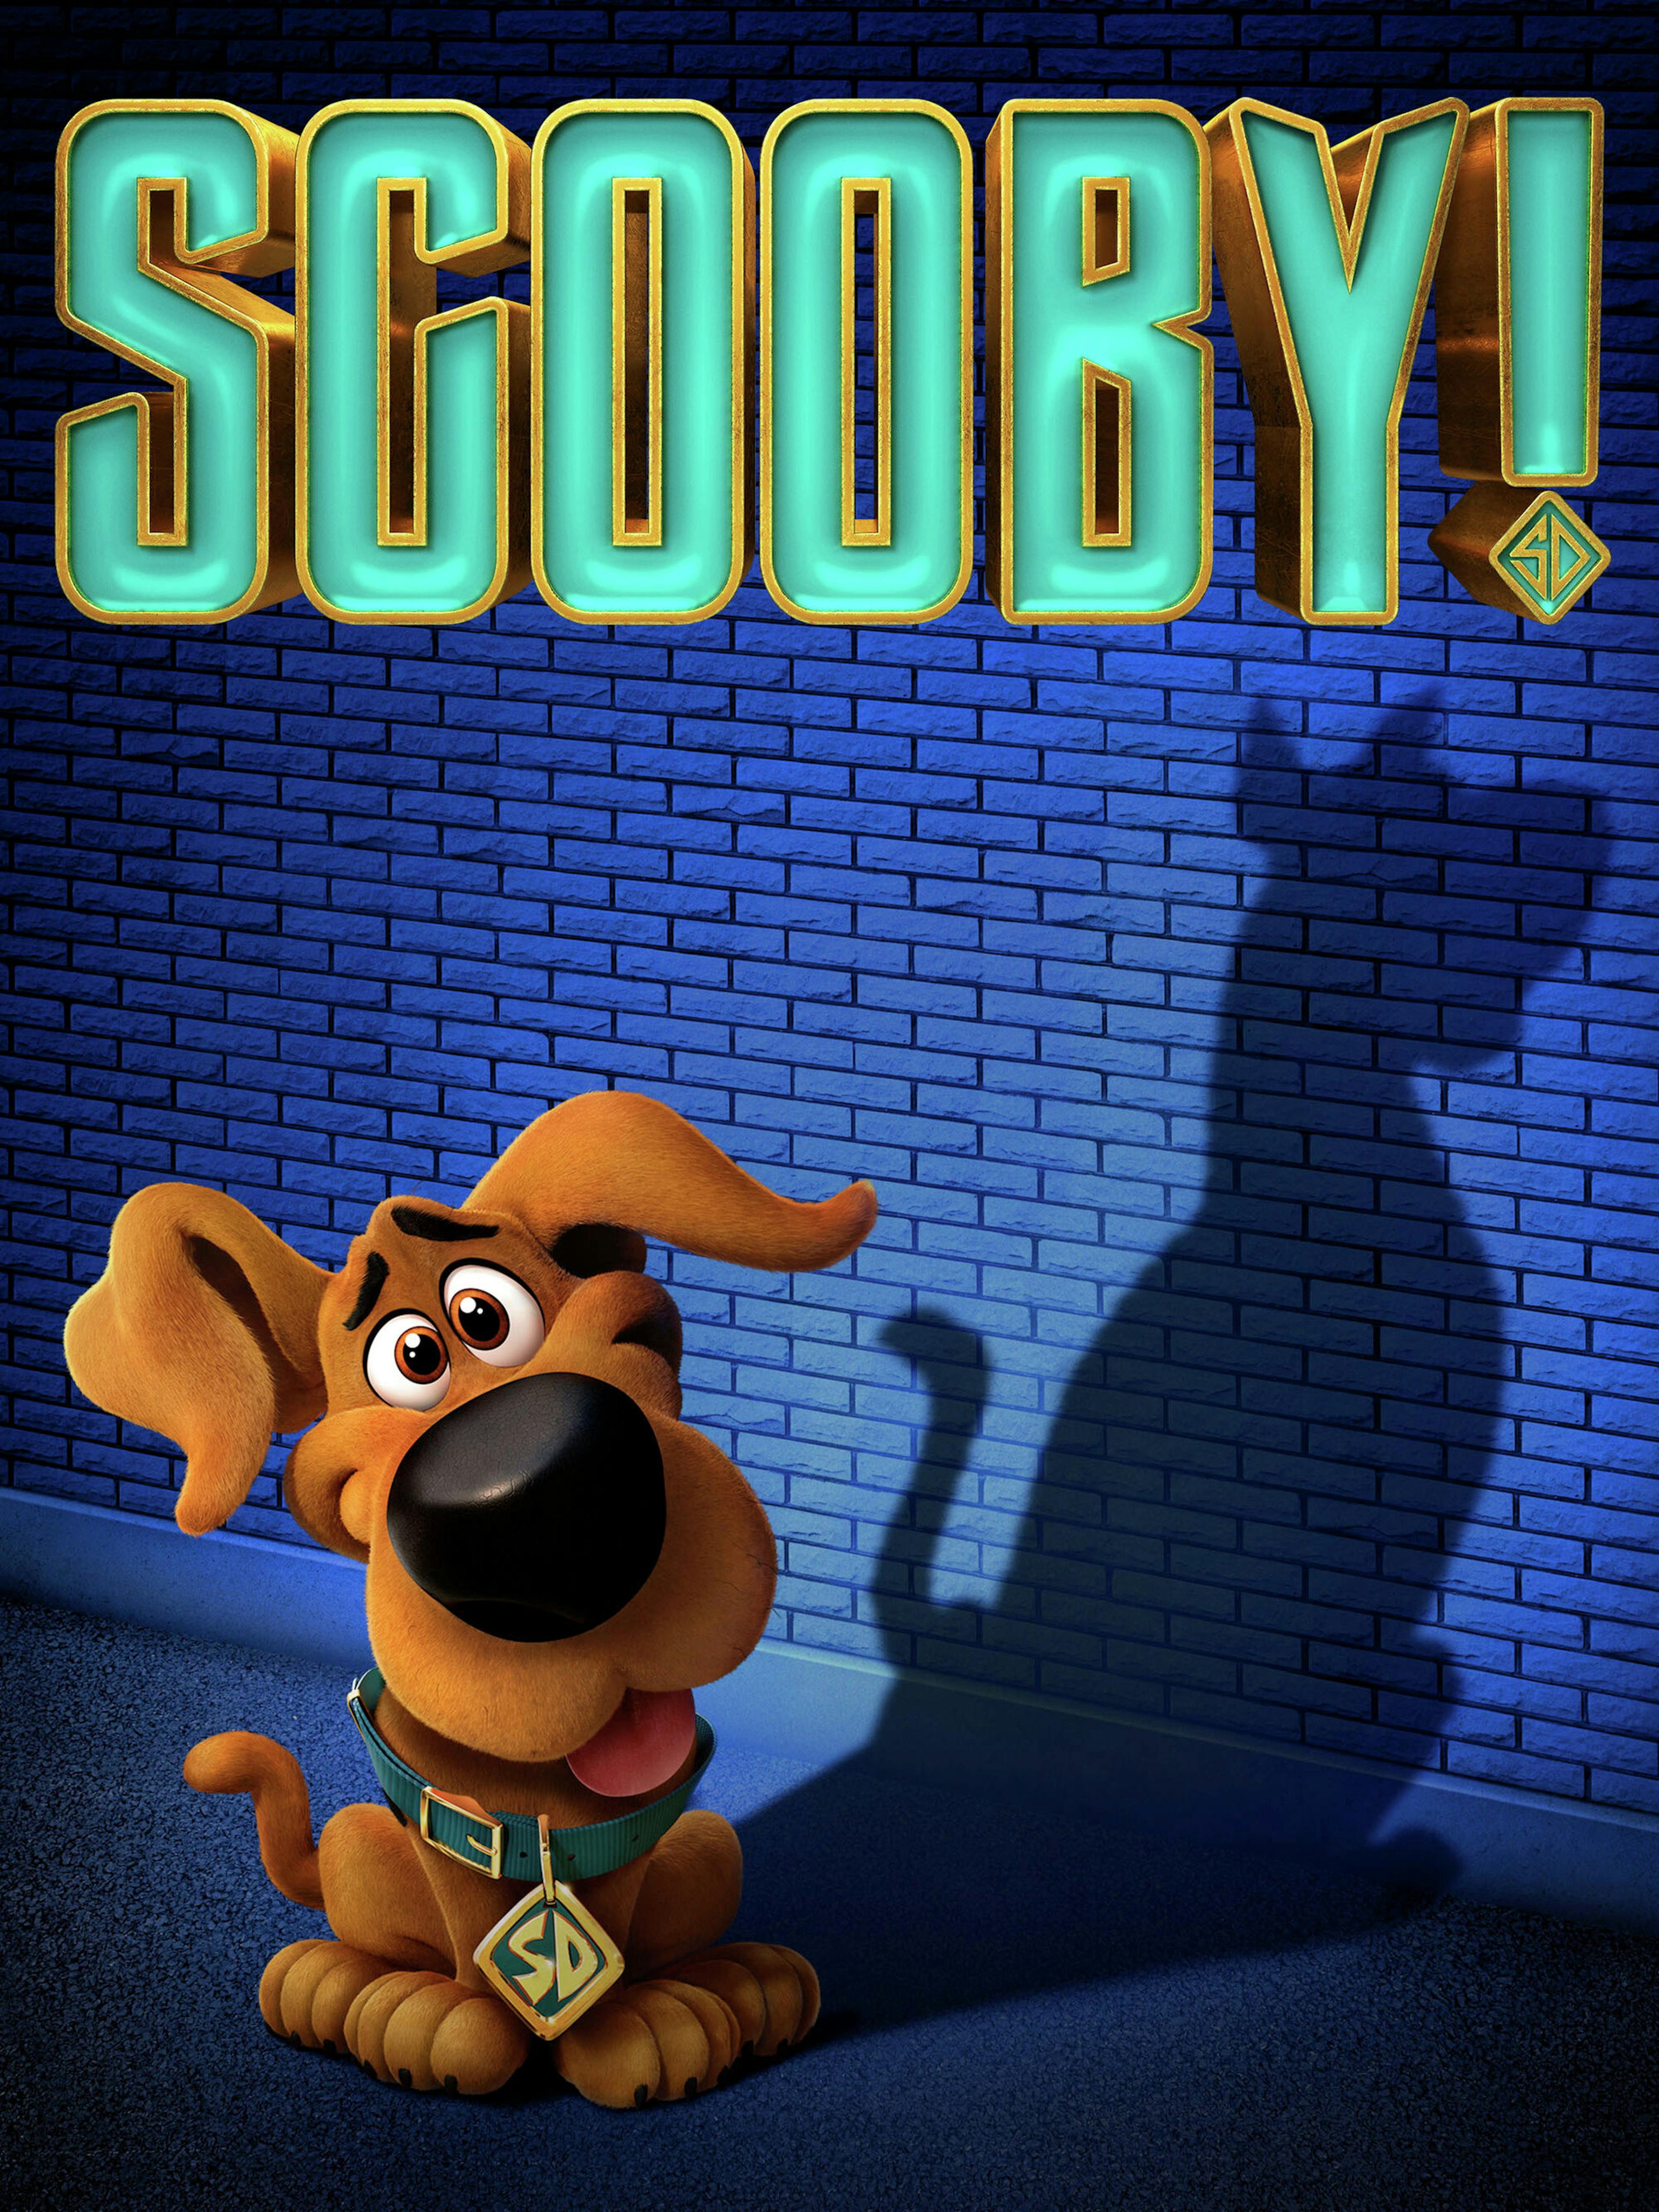 Scooby !